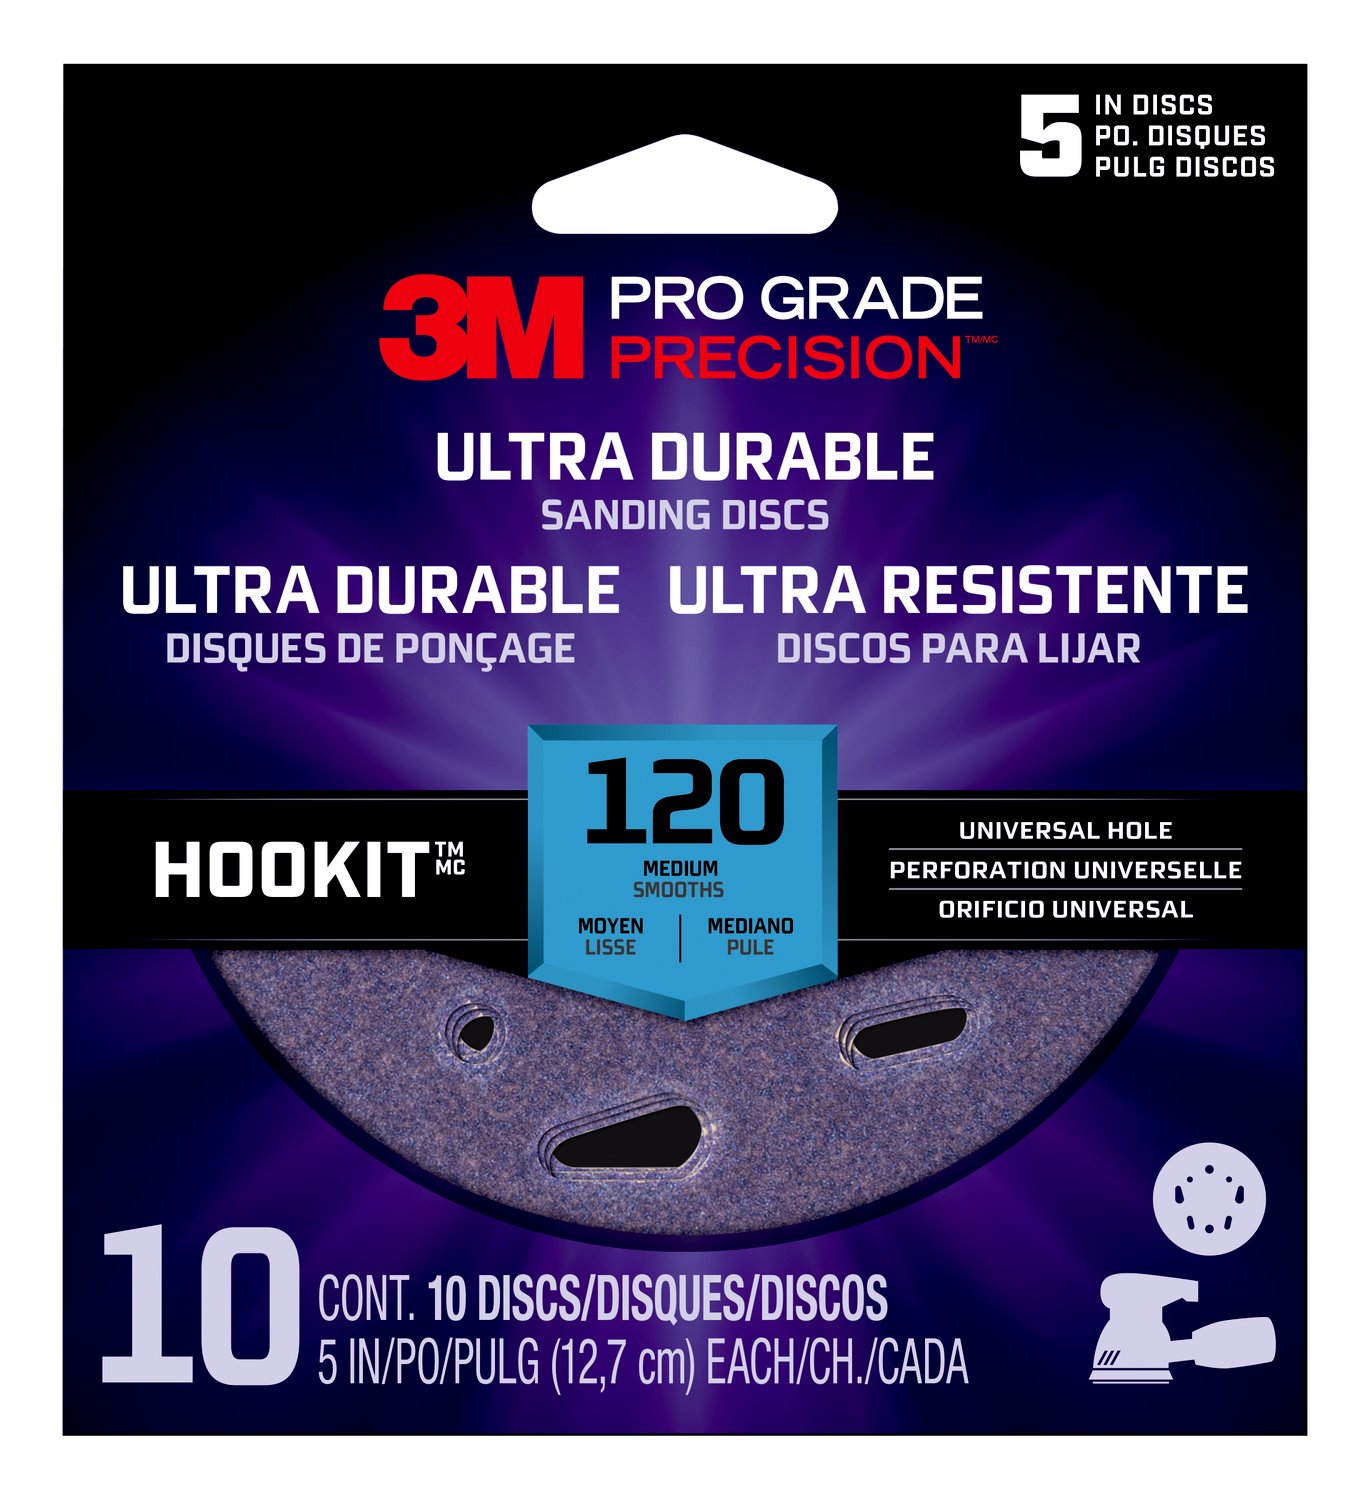 7100202877 - 3M Pro Grade Precision Ultra Durable Universal Hole Sanding Disc,
DUH5120TRI-10T, 5 IN x UH, 120, 10 pack